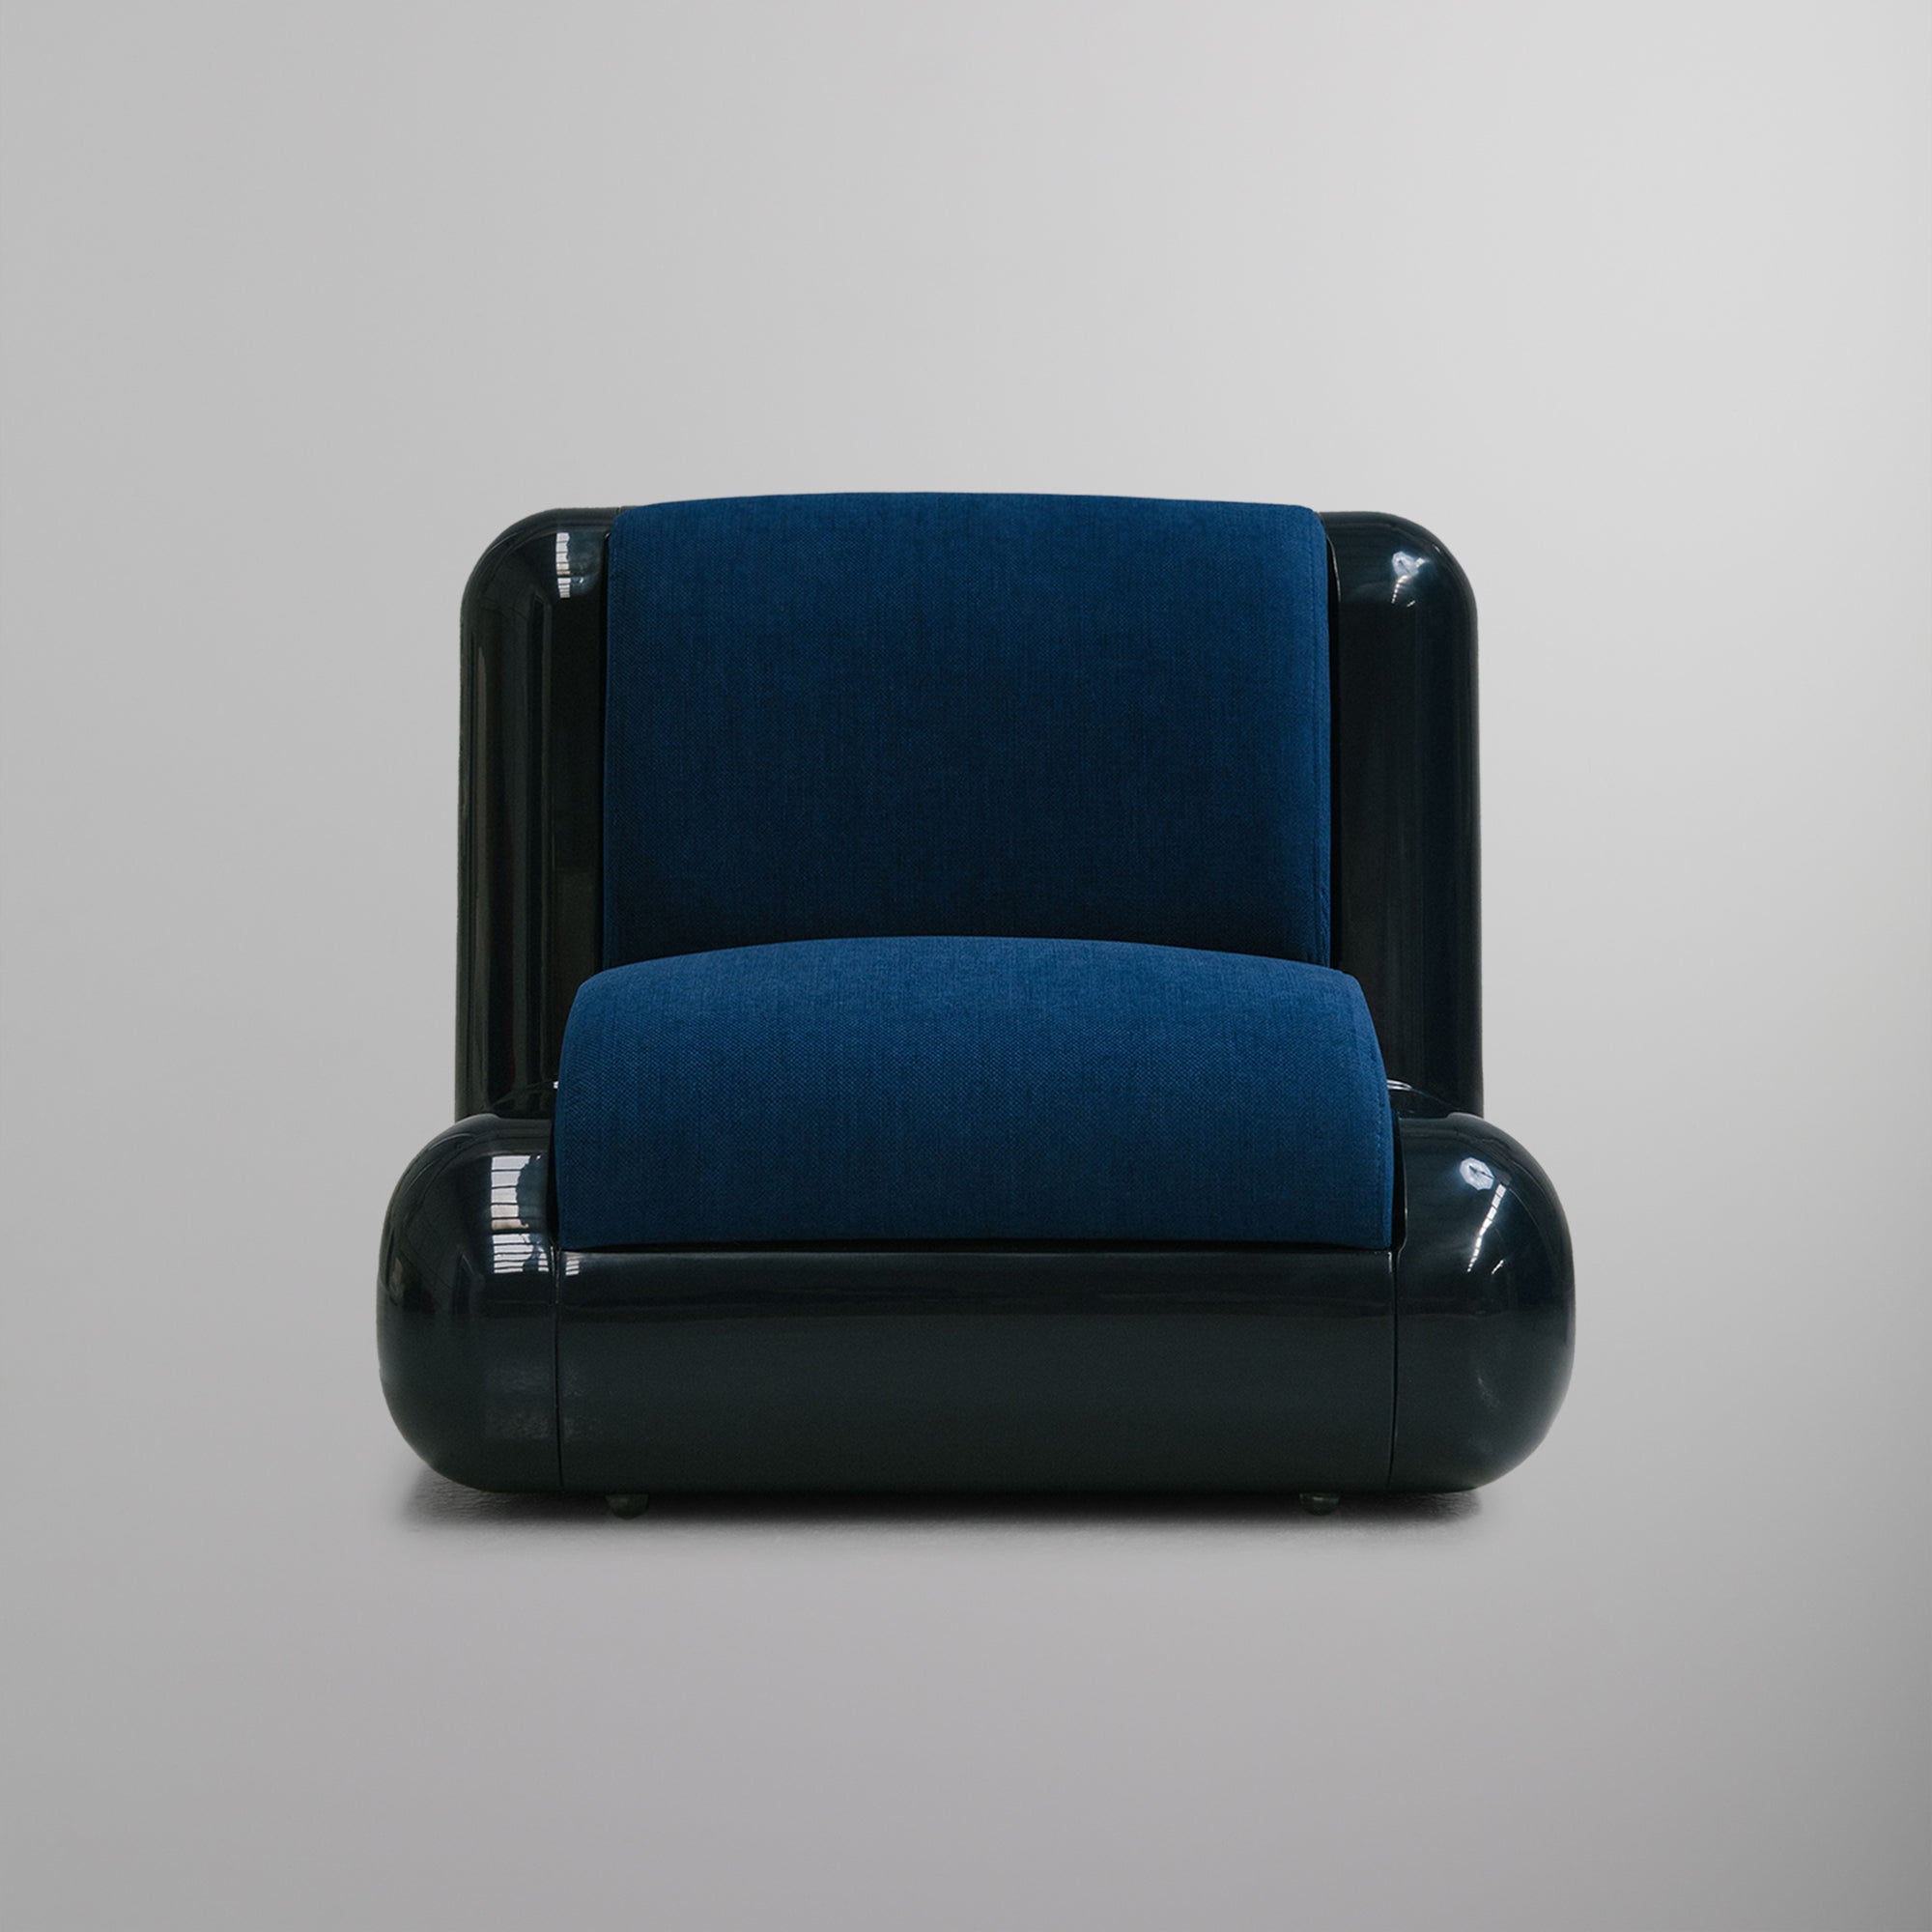 Kith for UMA T4 Chair - Nocturnal PH